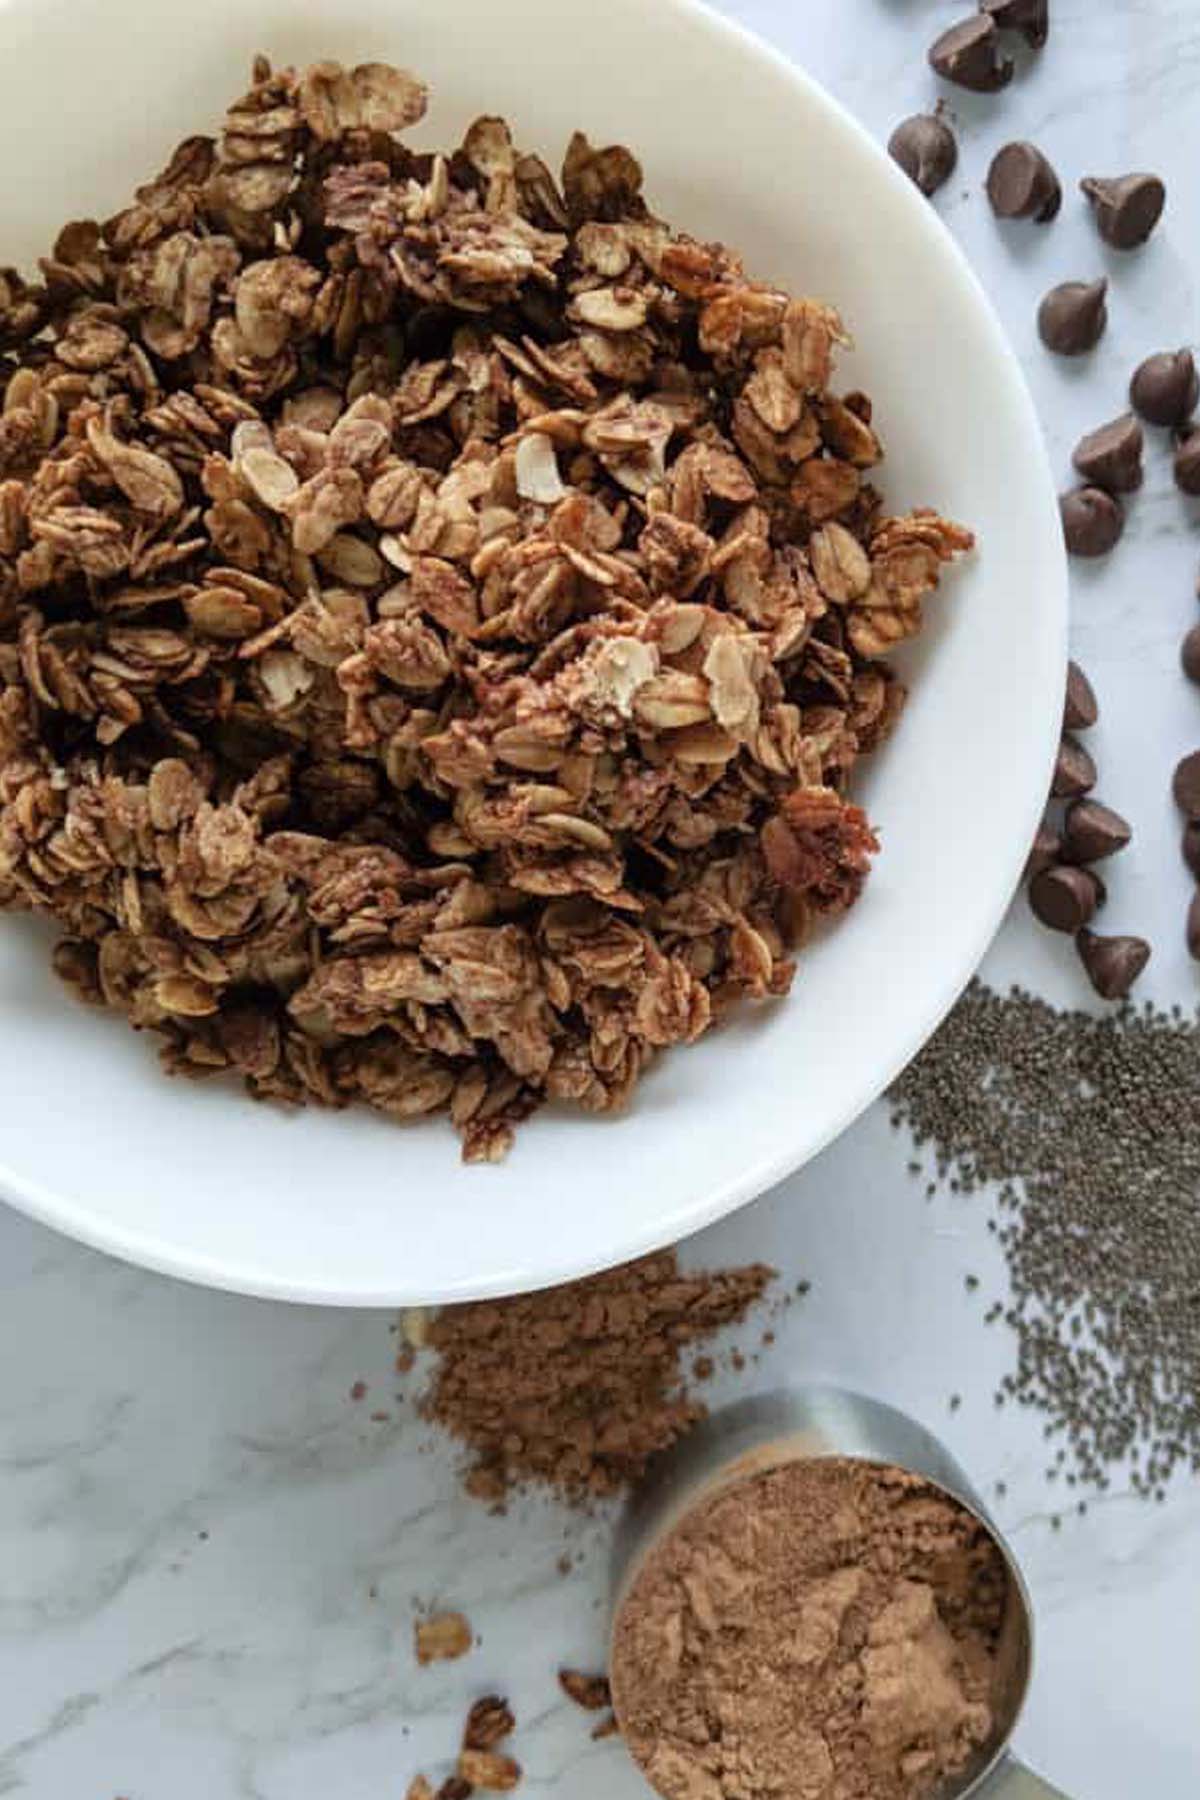 chocolate granola next to measuring cup with cocoa powder.